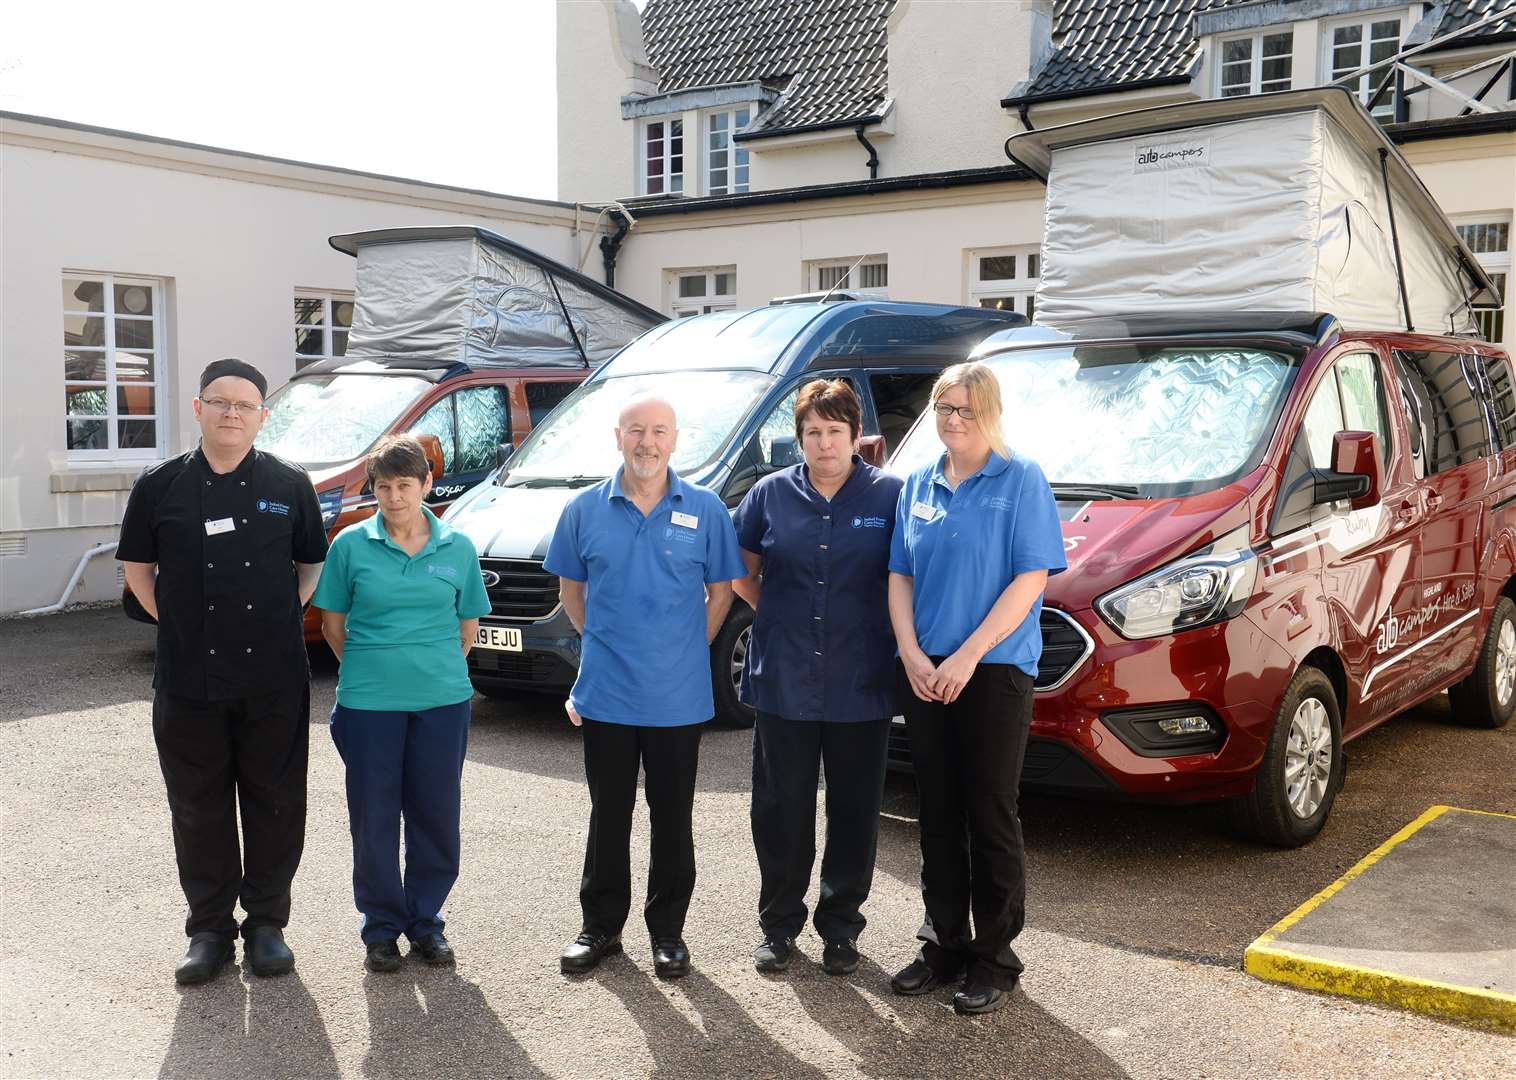 Staff at Isobel Fraser care home are using the campervans during lockdown.